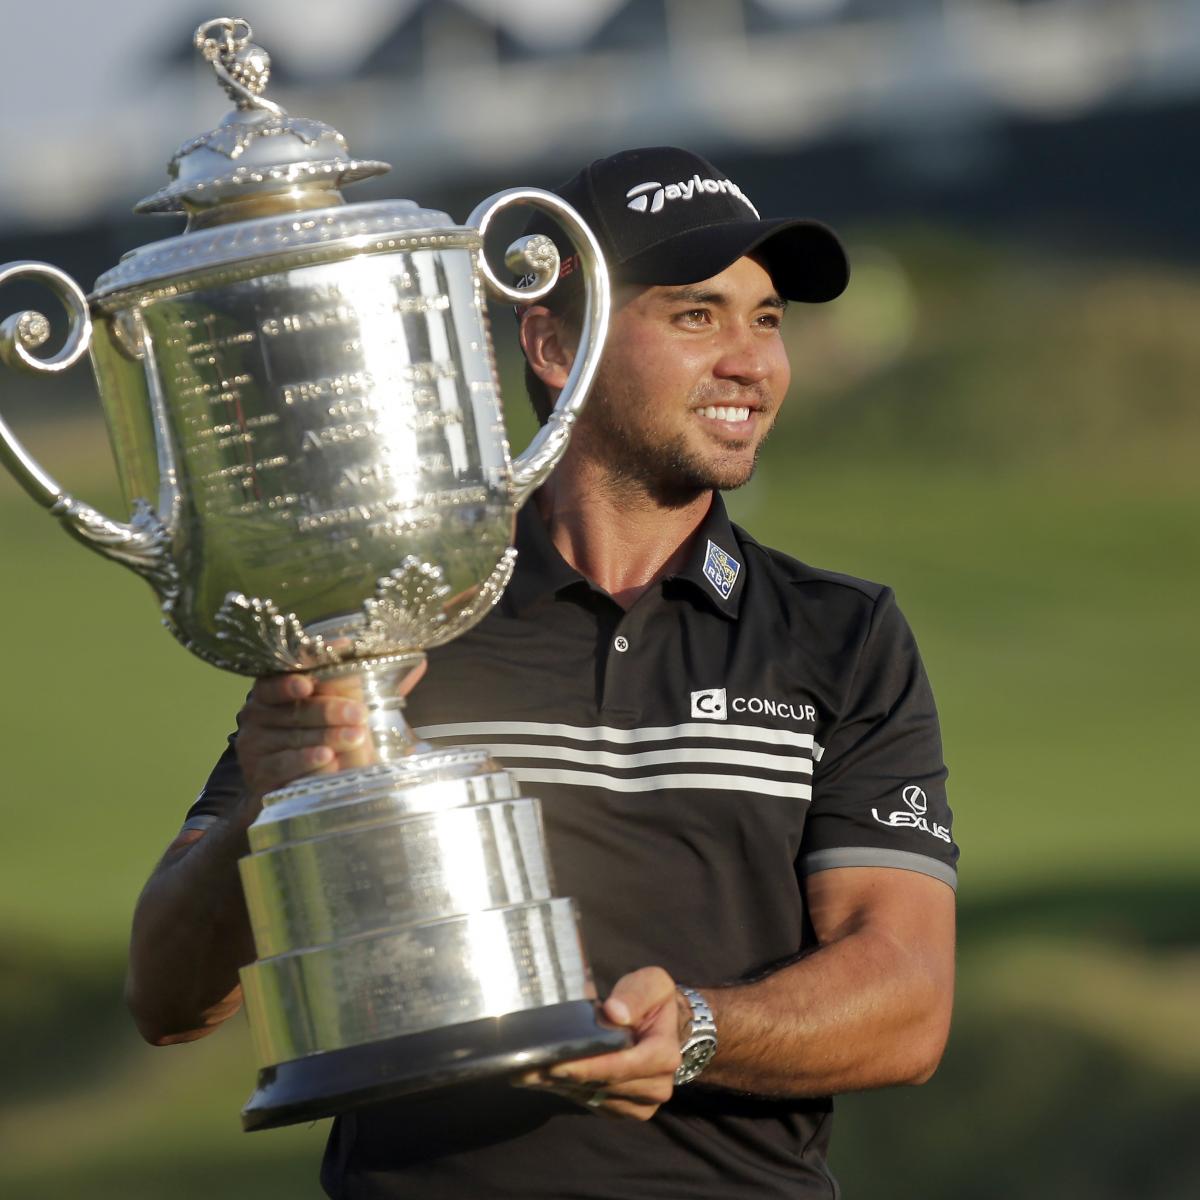 PGA Championship 2015 Prize Money Final Leaderboard, Total Purse and